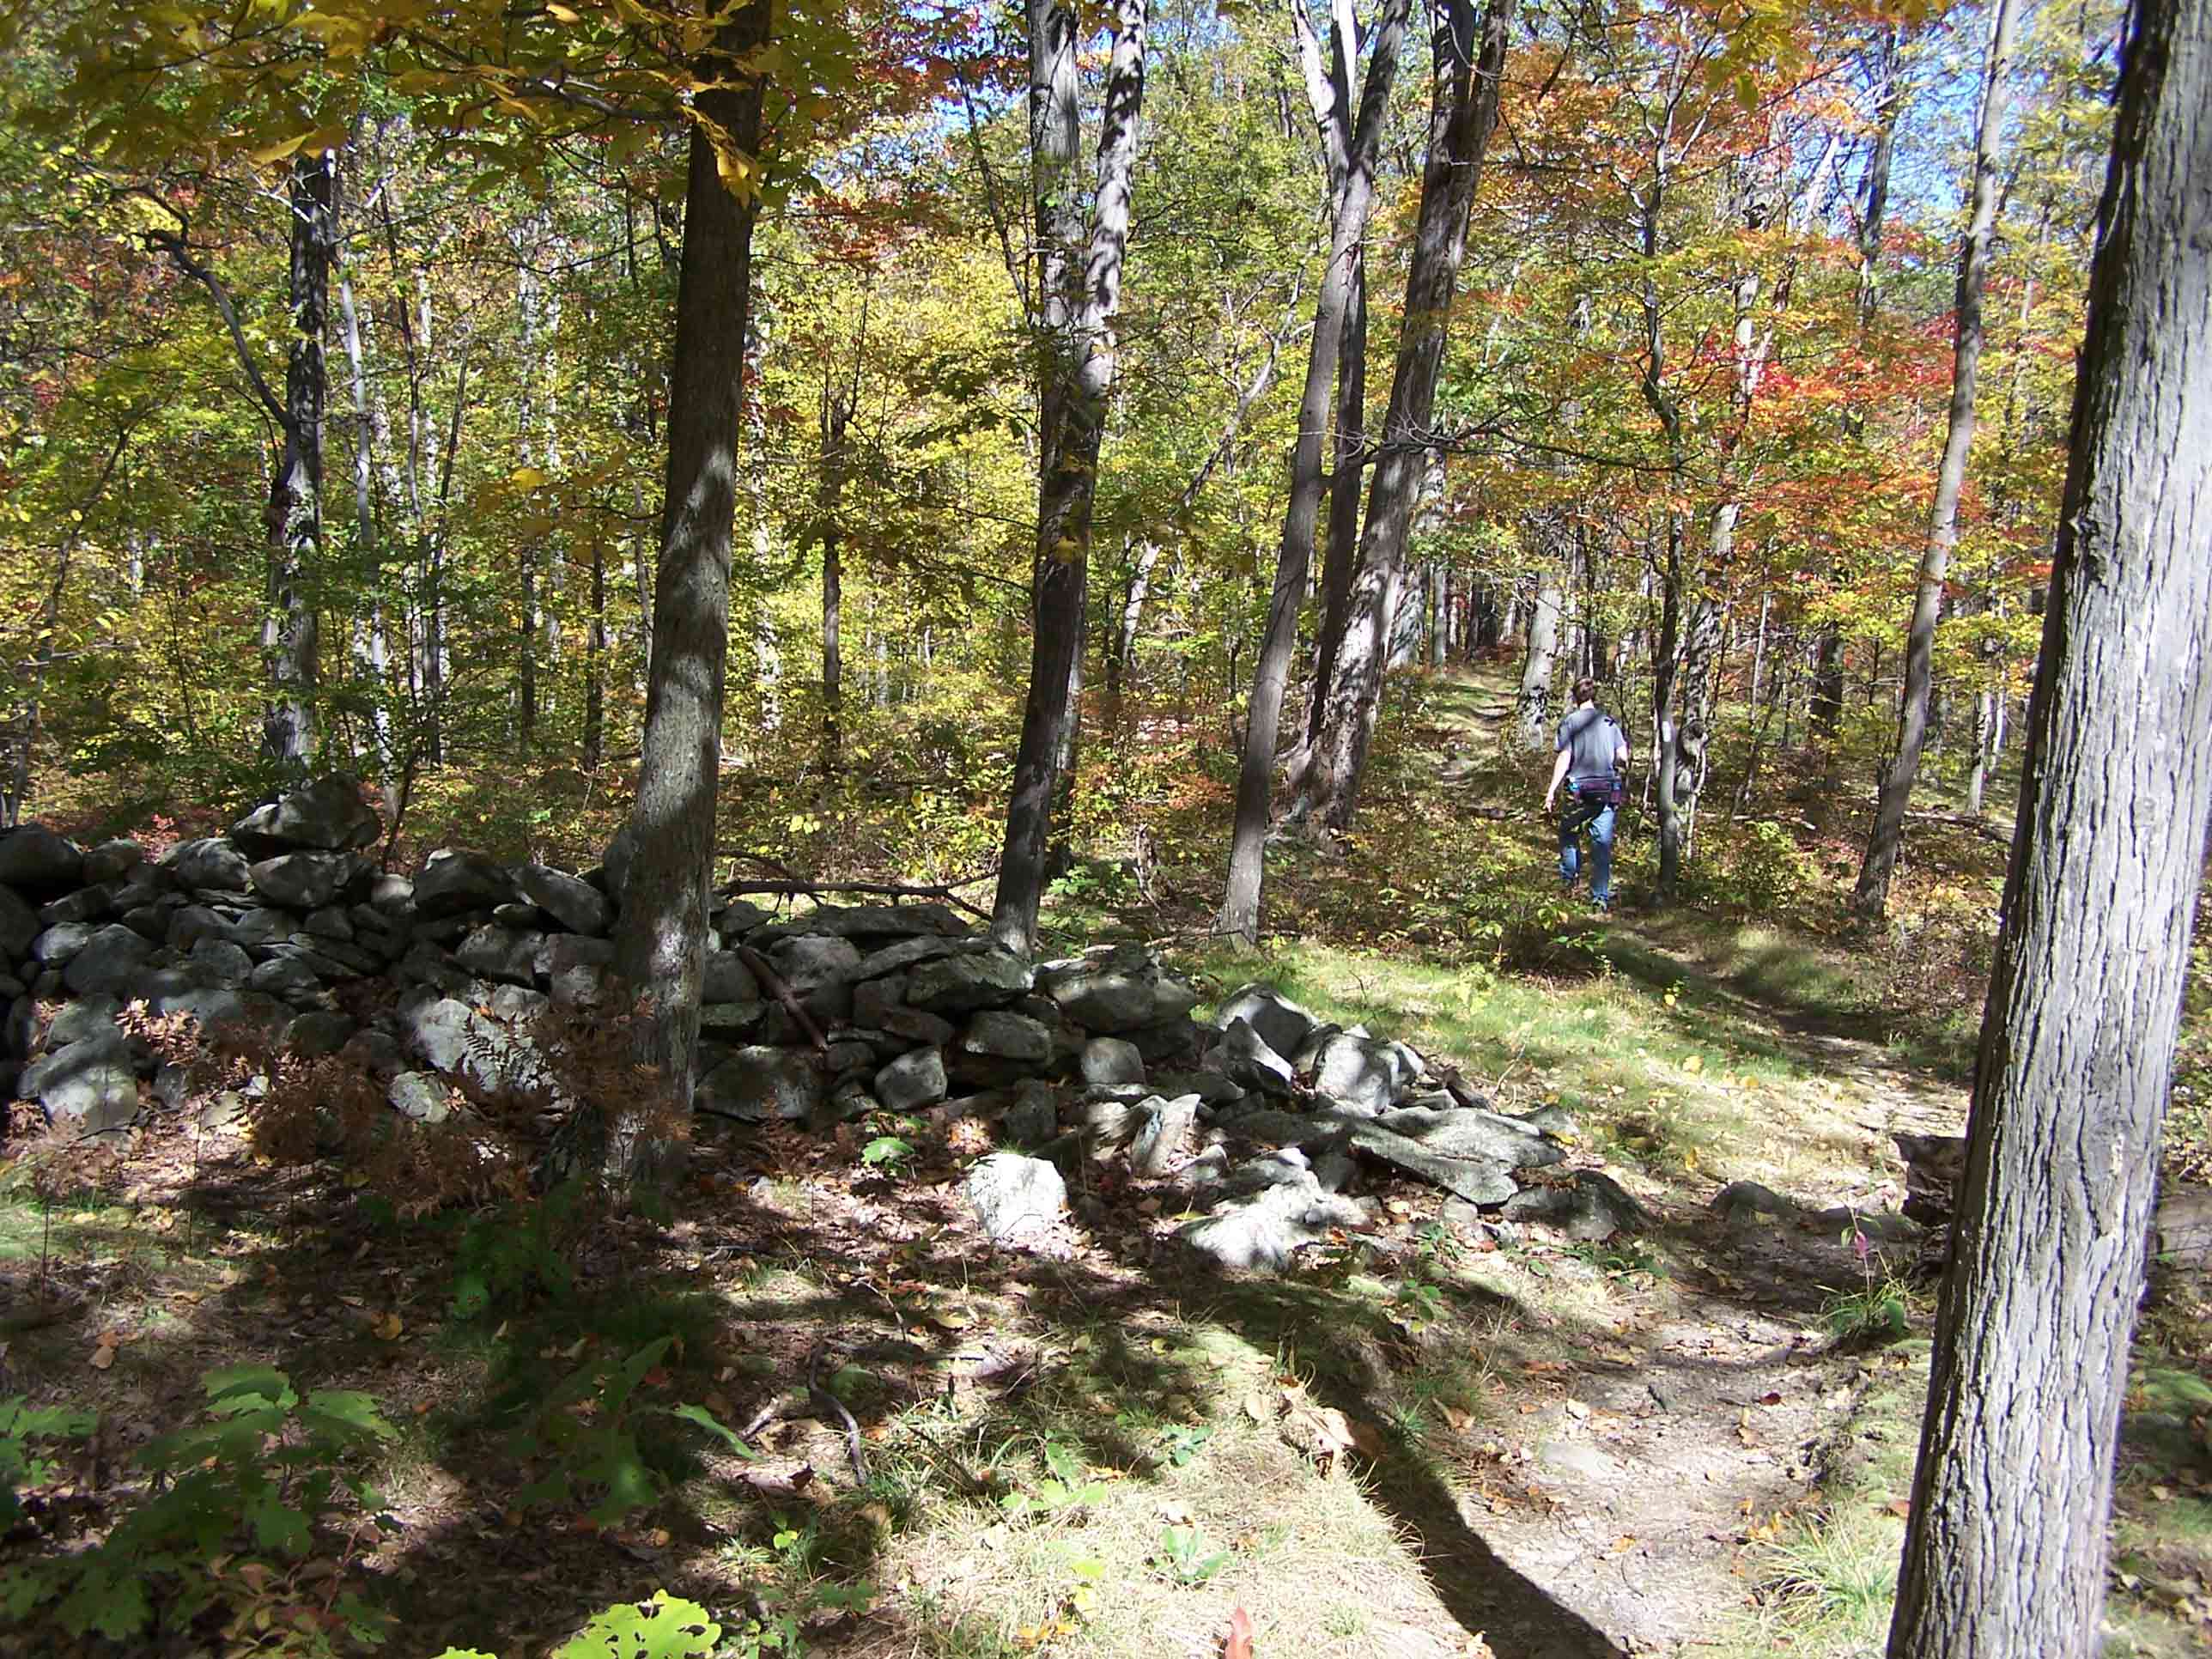 mm 7.3 - Gaps in stone walls for trail. Courtesy at@rohland.org